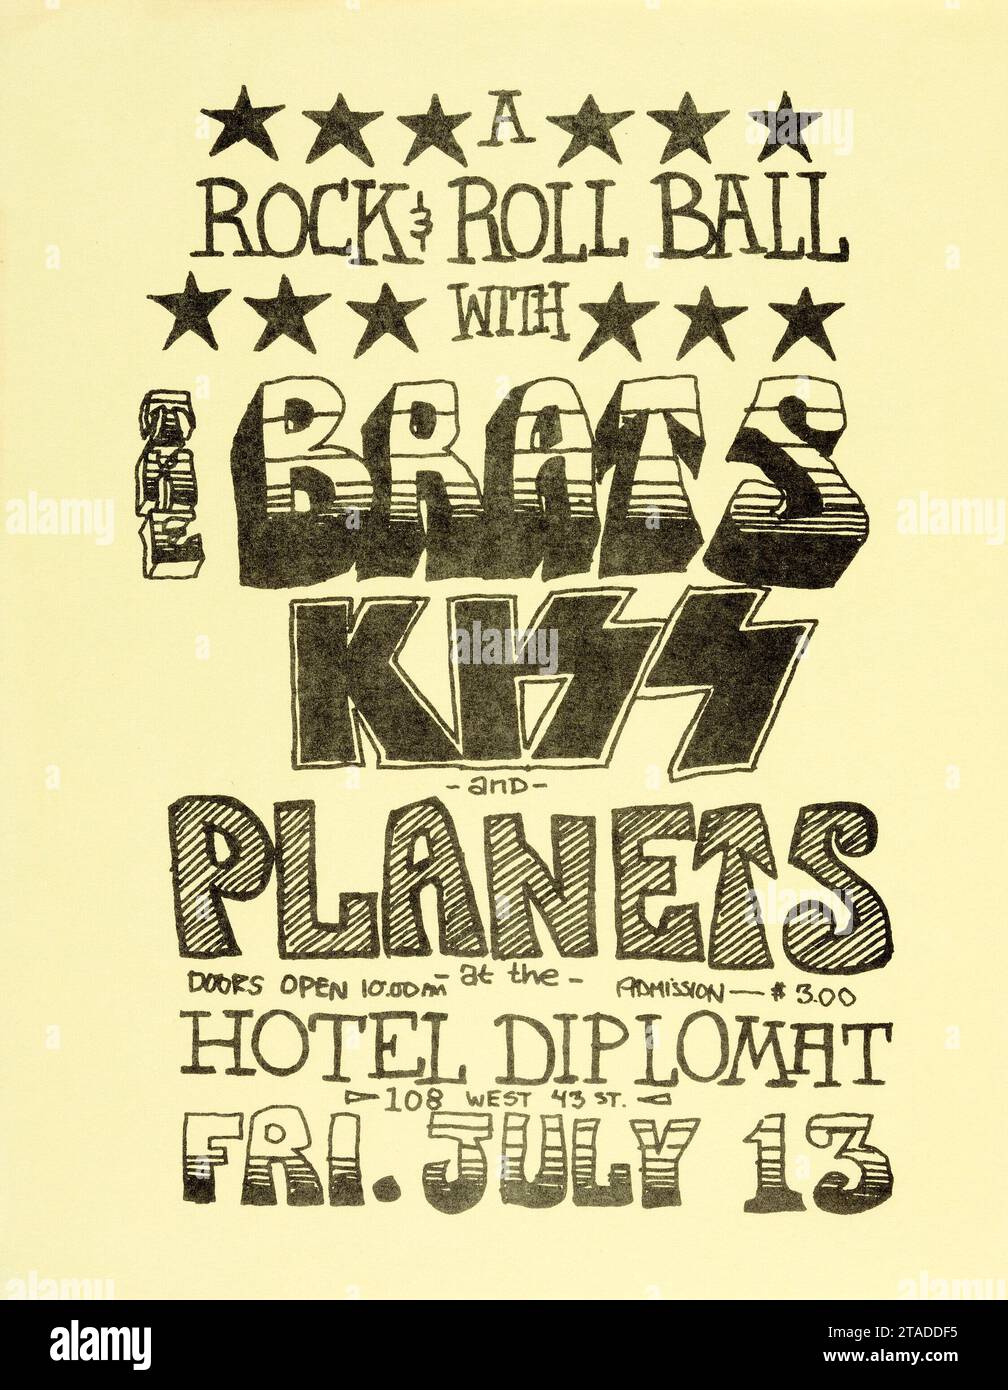 Concert flyer - KISS - Early Handbill Opening for The Brats in New York City 1973. Stock Photo